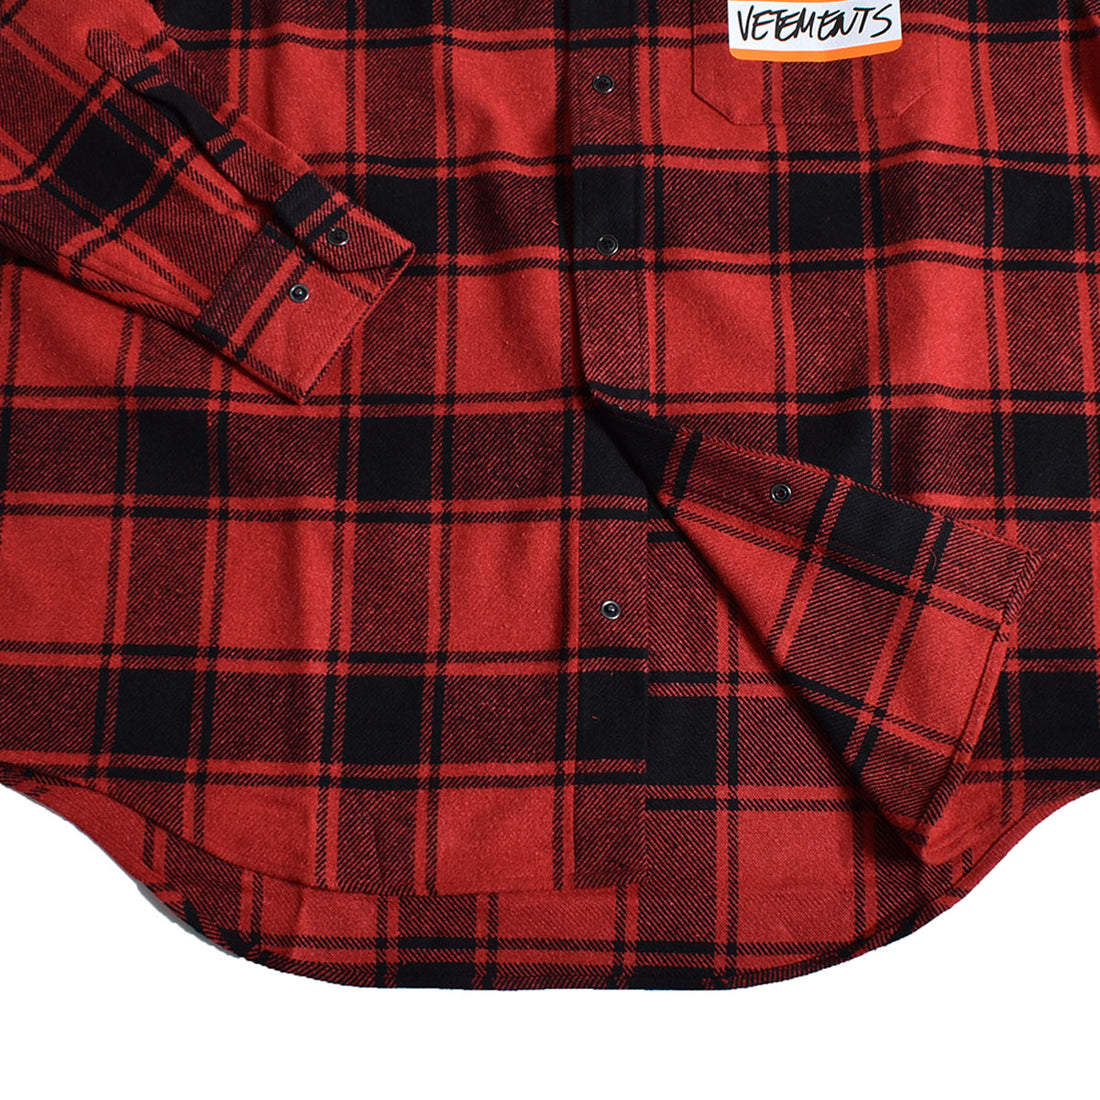 [VETEMENTS]MY NAME IS VETEMENTS FLANNEL SHIRT/RED(UE54SH420)